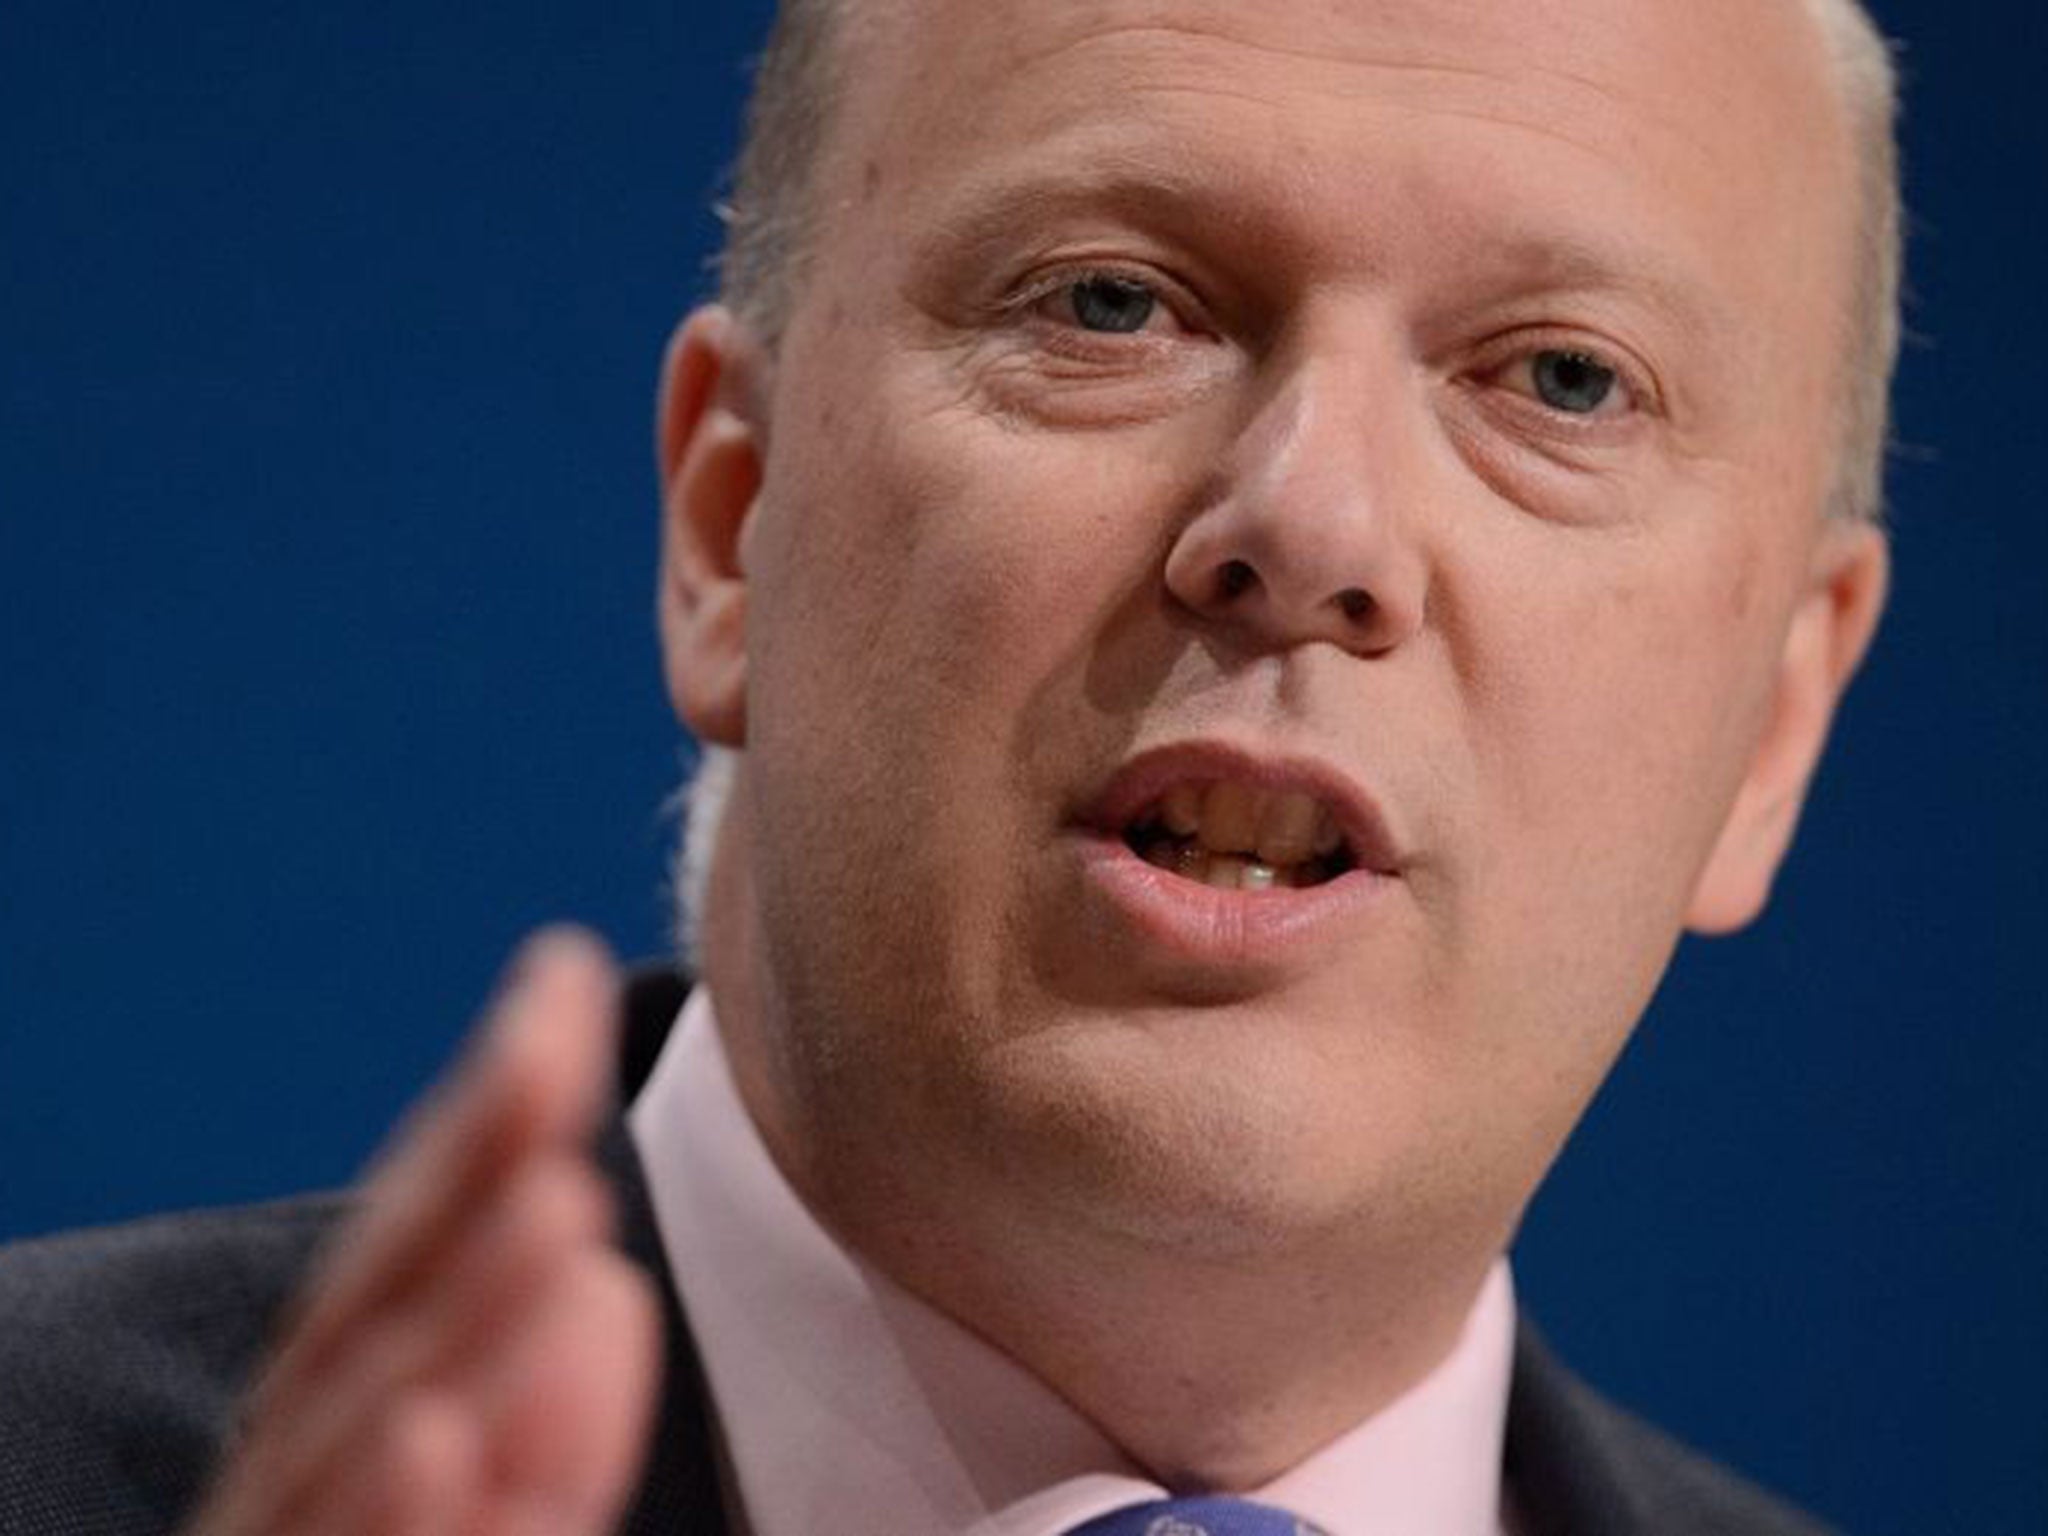 Chris Grayling said he was against the idea of moving MPs out of the Palace of Westminster